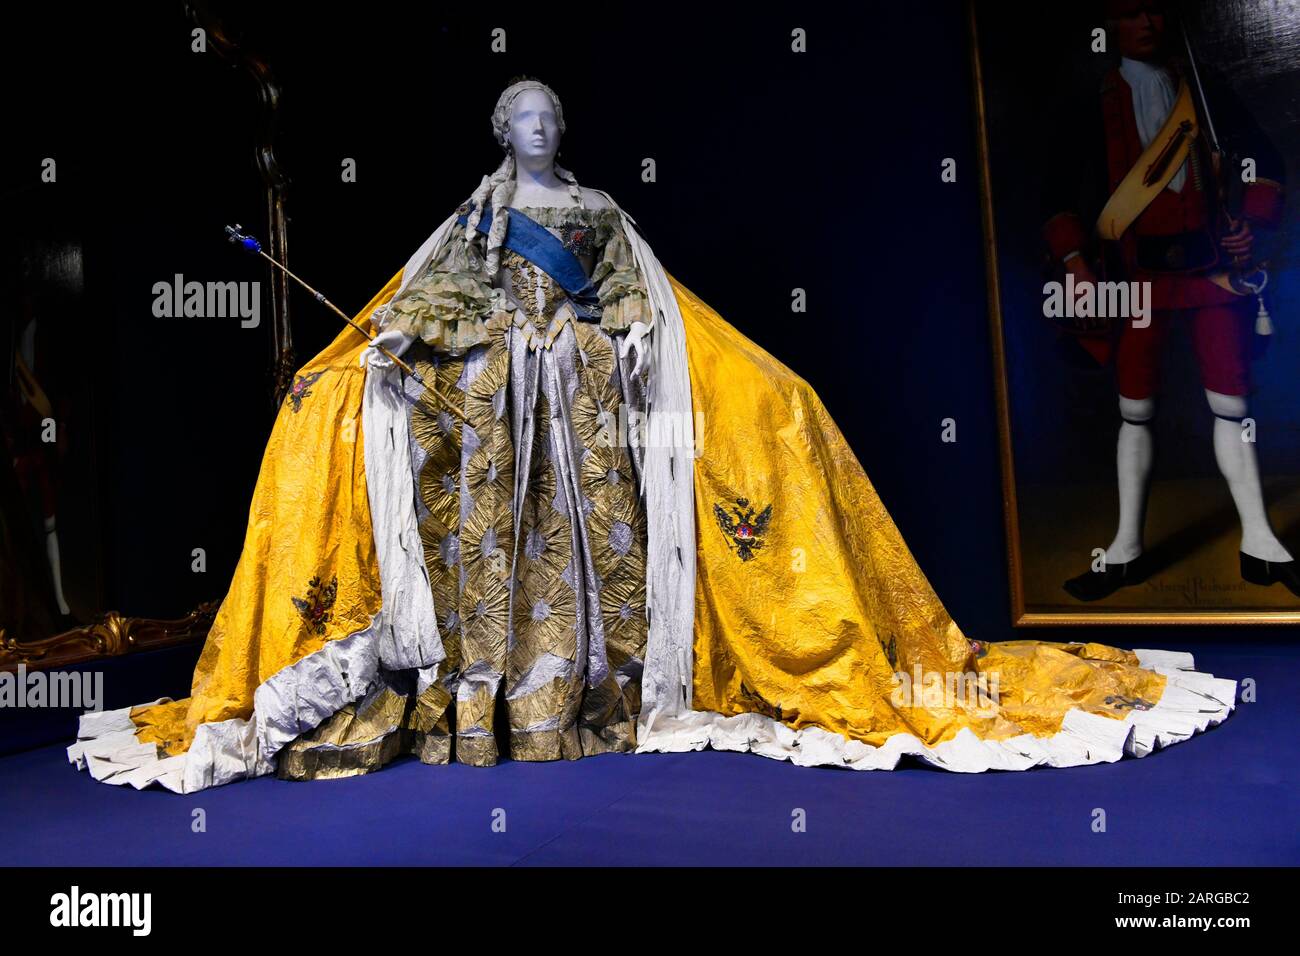 The Court Gown and Robe of Empress Catherine the Great displayed inside Catherine Palace, Pushkin,St Petersburg Russia. Stock Photo